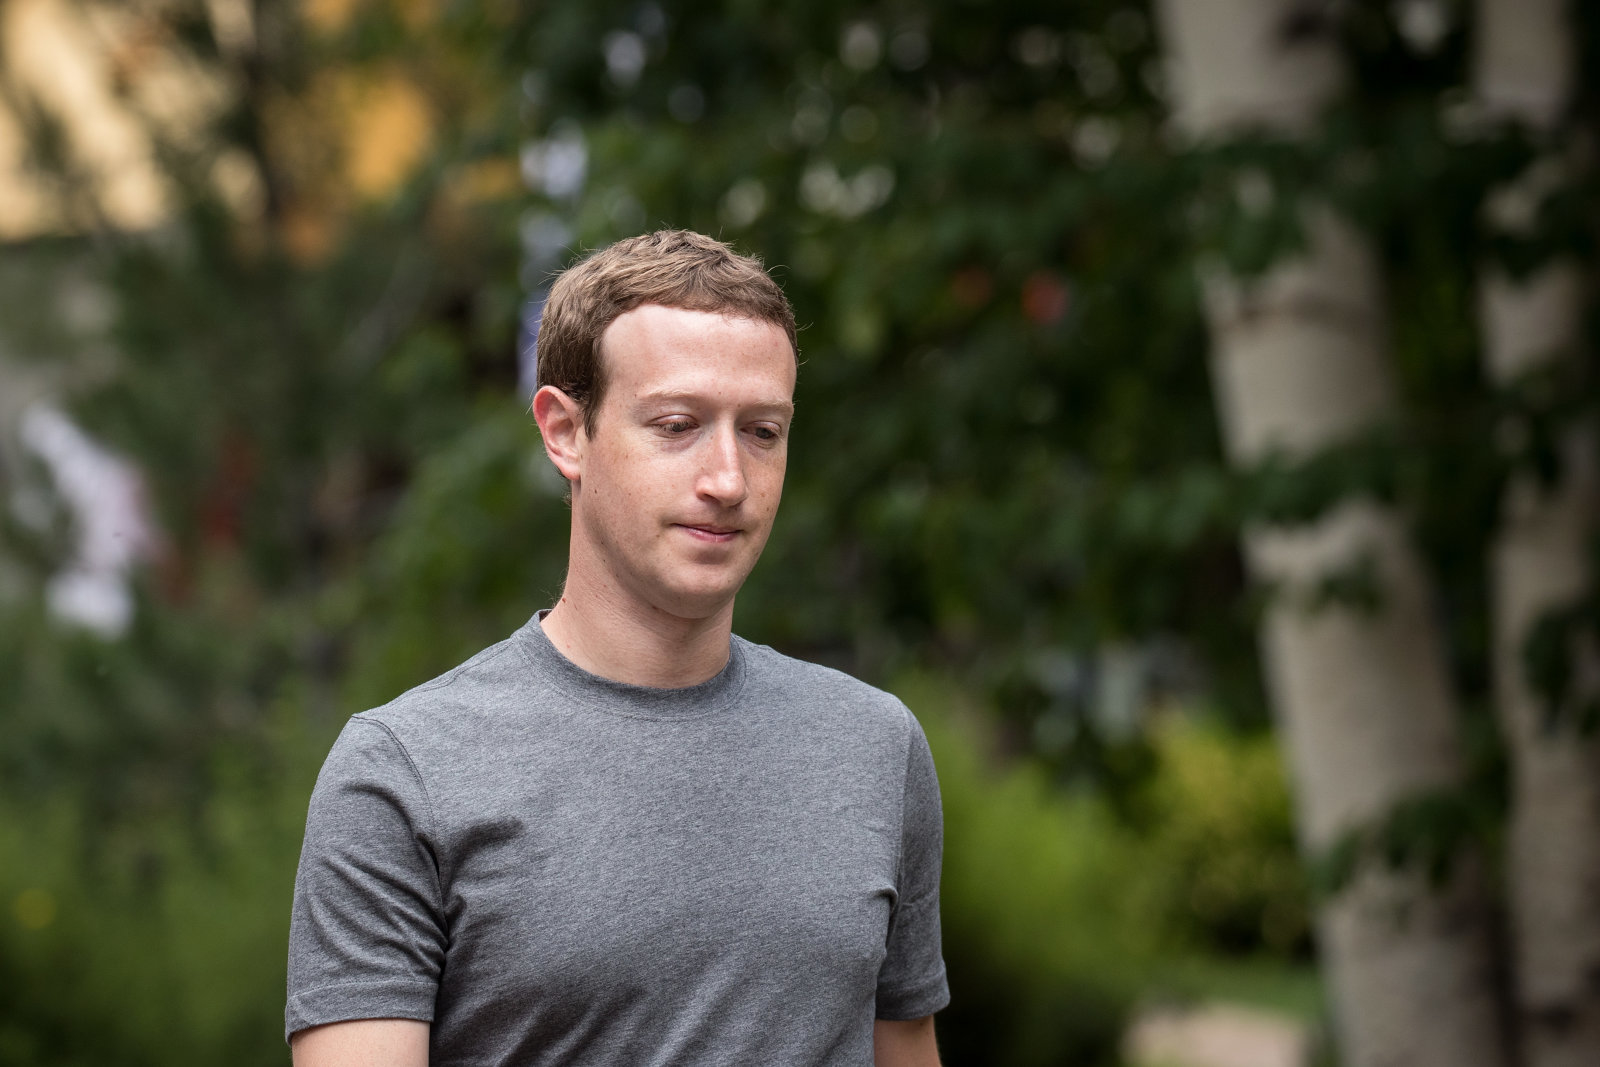 SUN VALLEY, ID - JULY 14: Mark Zuckerberg, chief executive officer and founder of Facebook Inc., attends the fourth day of the annual Allen & Company Sun Valley Conference, July 14, 2017 in Sun Valley, Idaho. Every July, some of the world's most wealthy and powerful businesspeople from the media, finance, technology and political spheres converge at the Sun Valley Resort for the exclusive weeklong conference. (Photo by Drew Angerer/Getty Images)